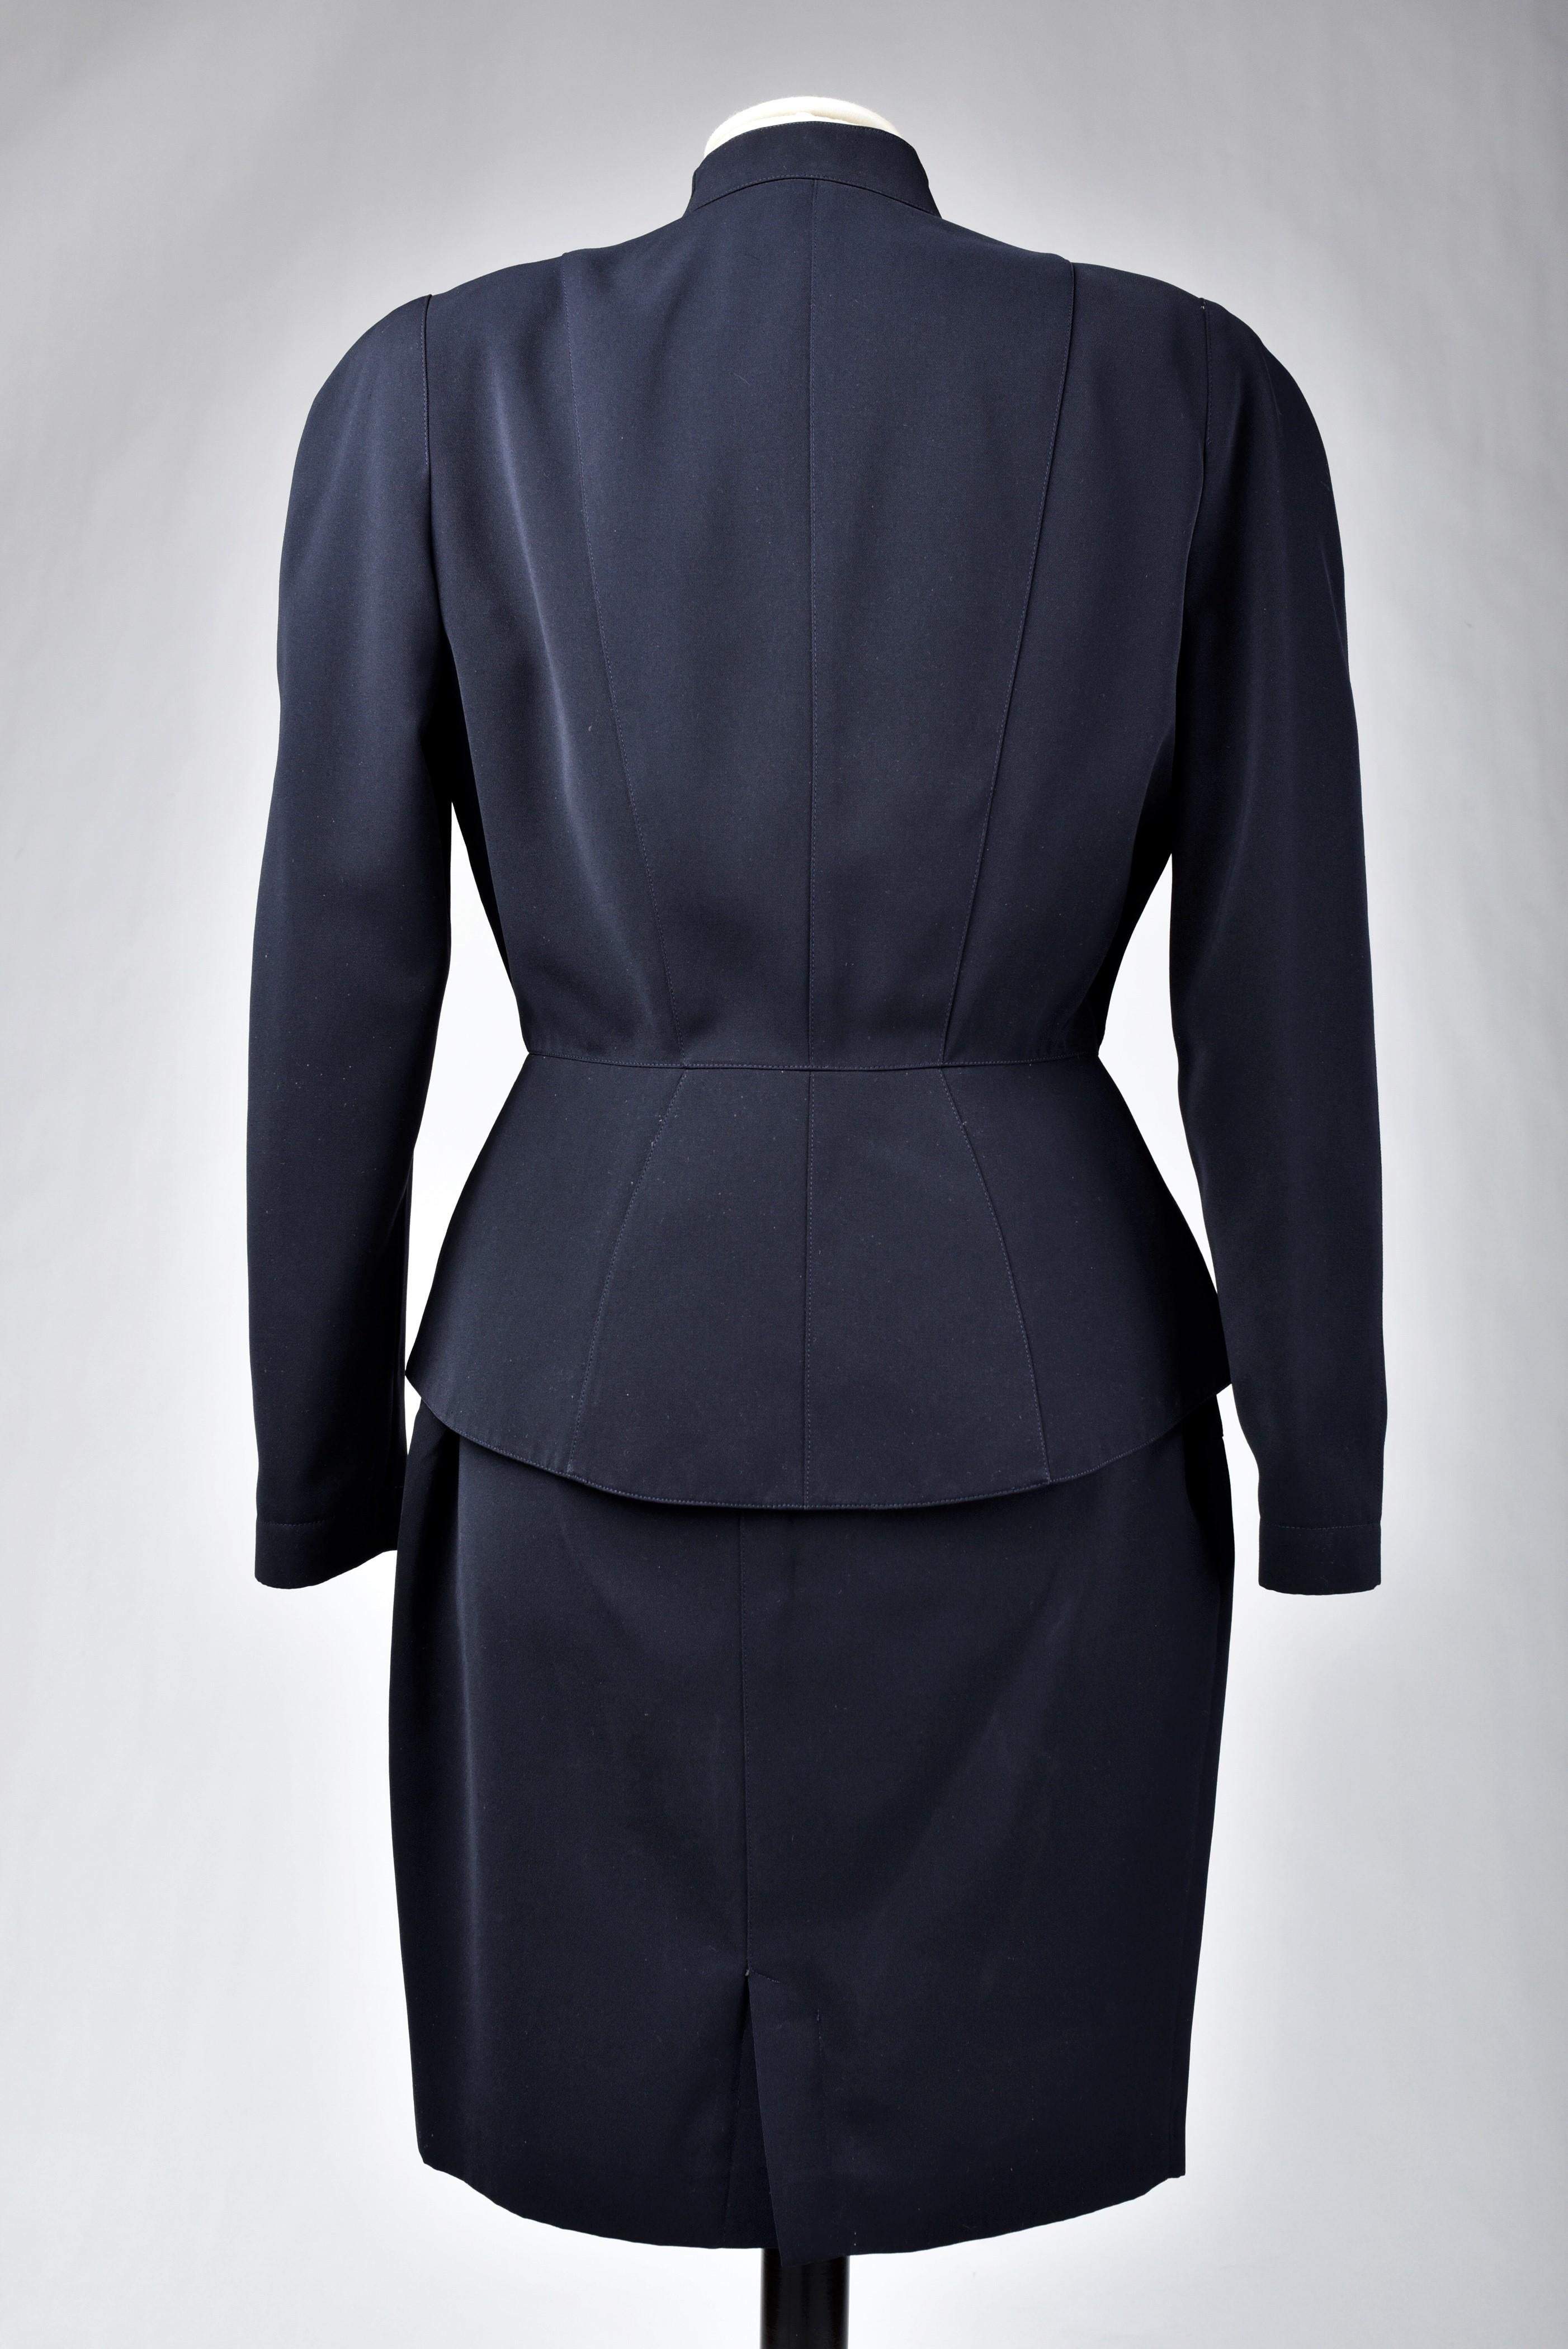 A Thierry Mugler Couture Black Tuxedo Skirt Suit - France Circa 1990/2000 For Sale 5